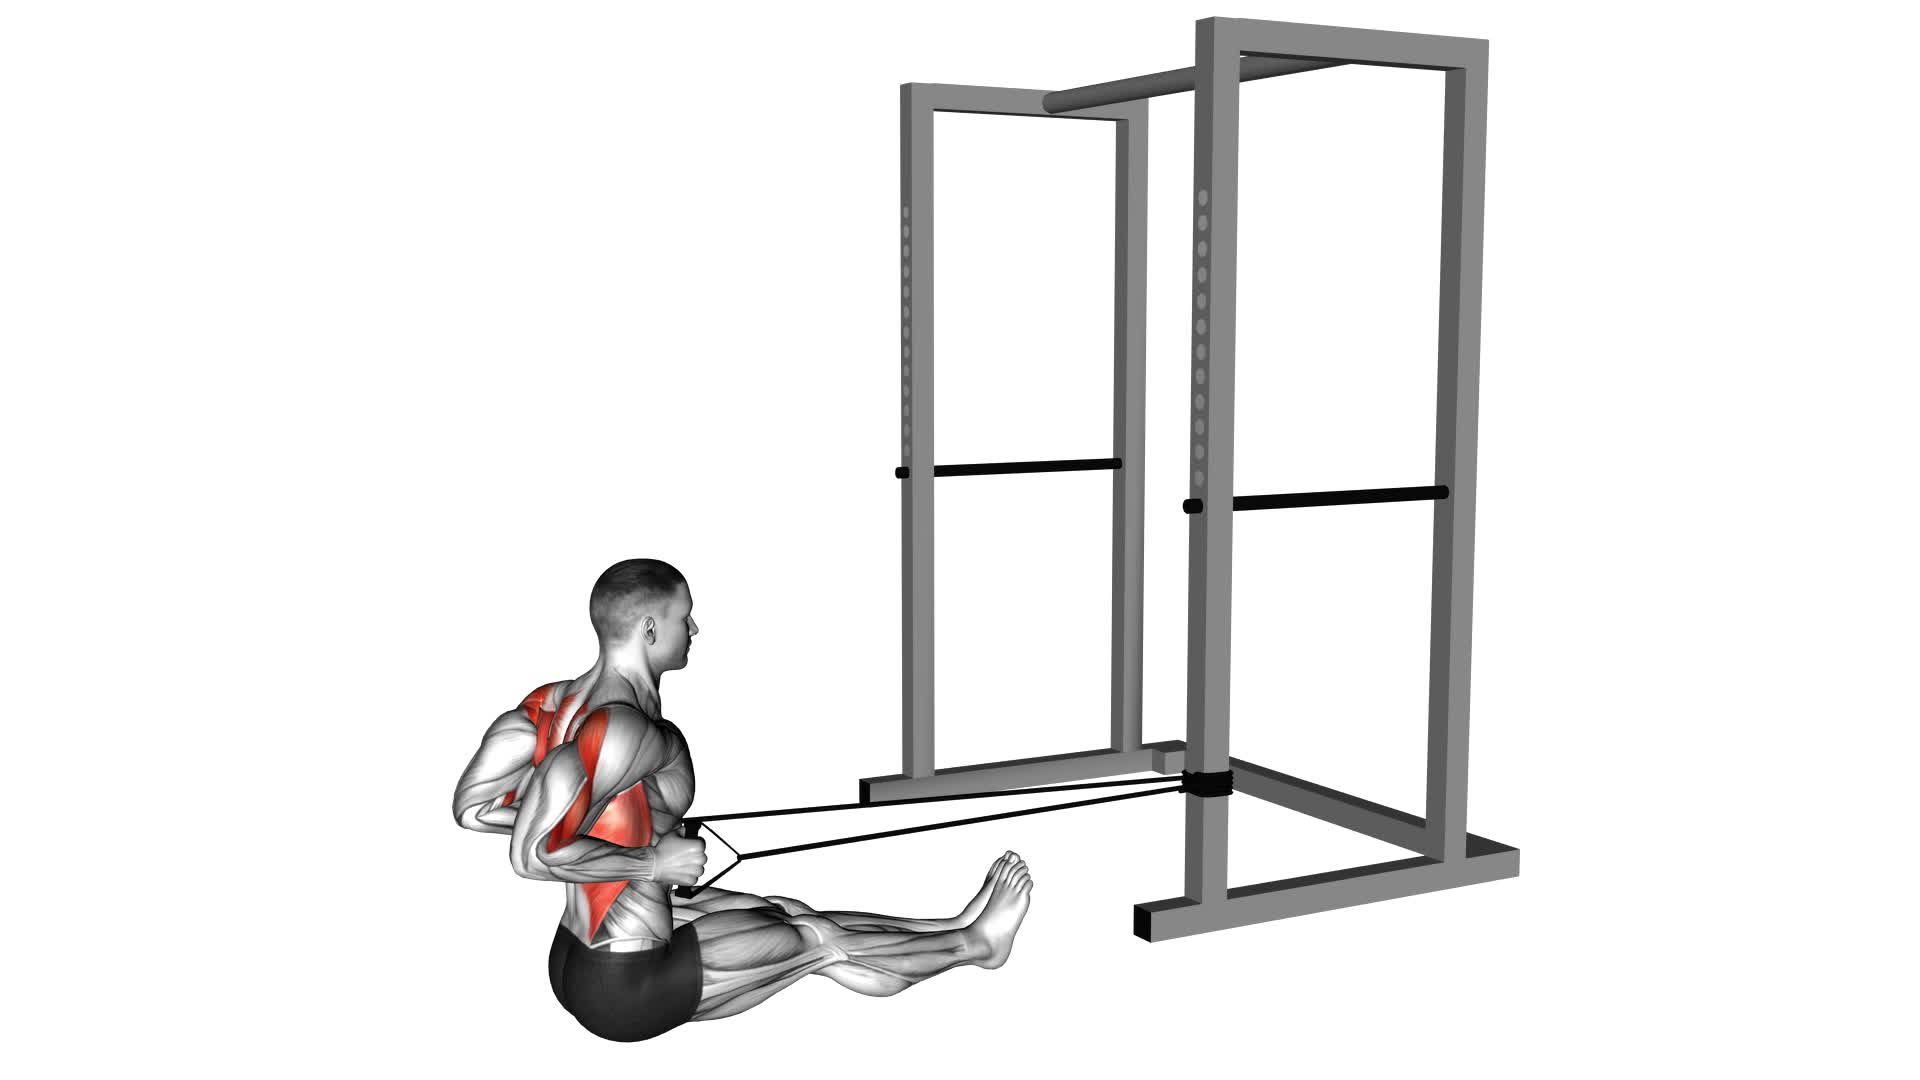 Band Seated Row (Male) - Video Exercise Guide & Tips